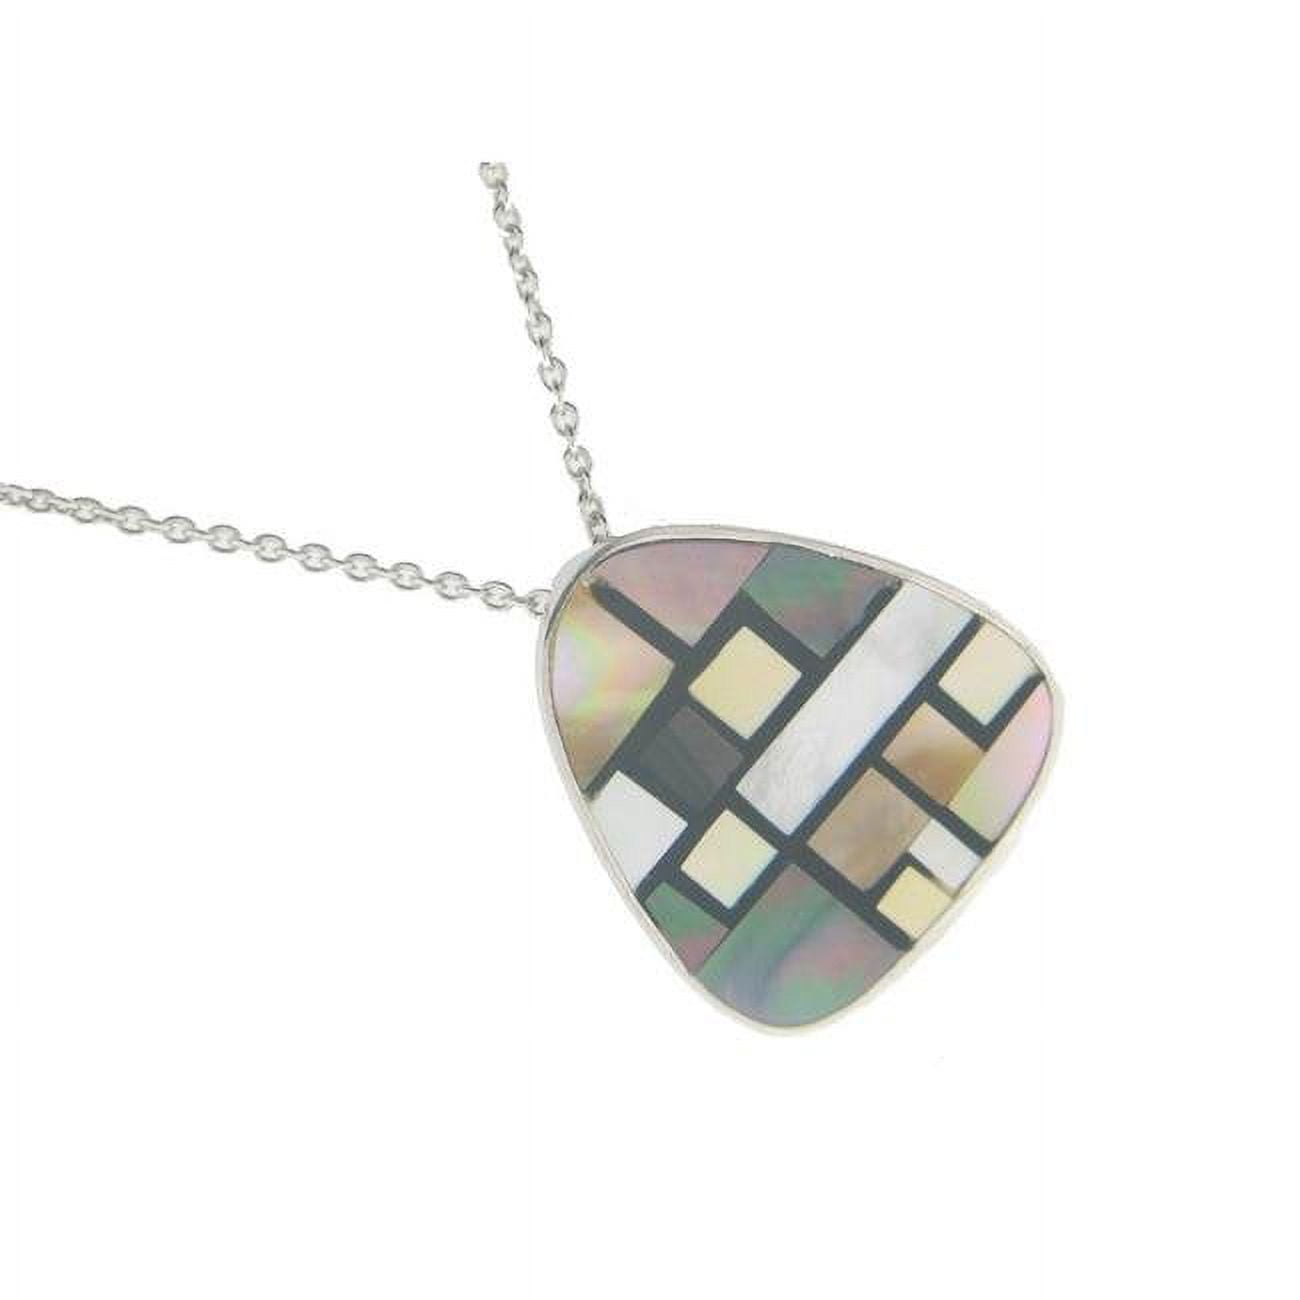 851115 16 In. Vintage Triad Mother Of Pearl Pendant Necklace In 925 Sterling Silver